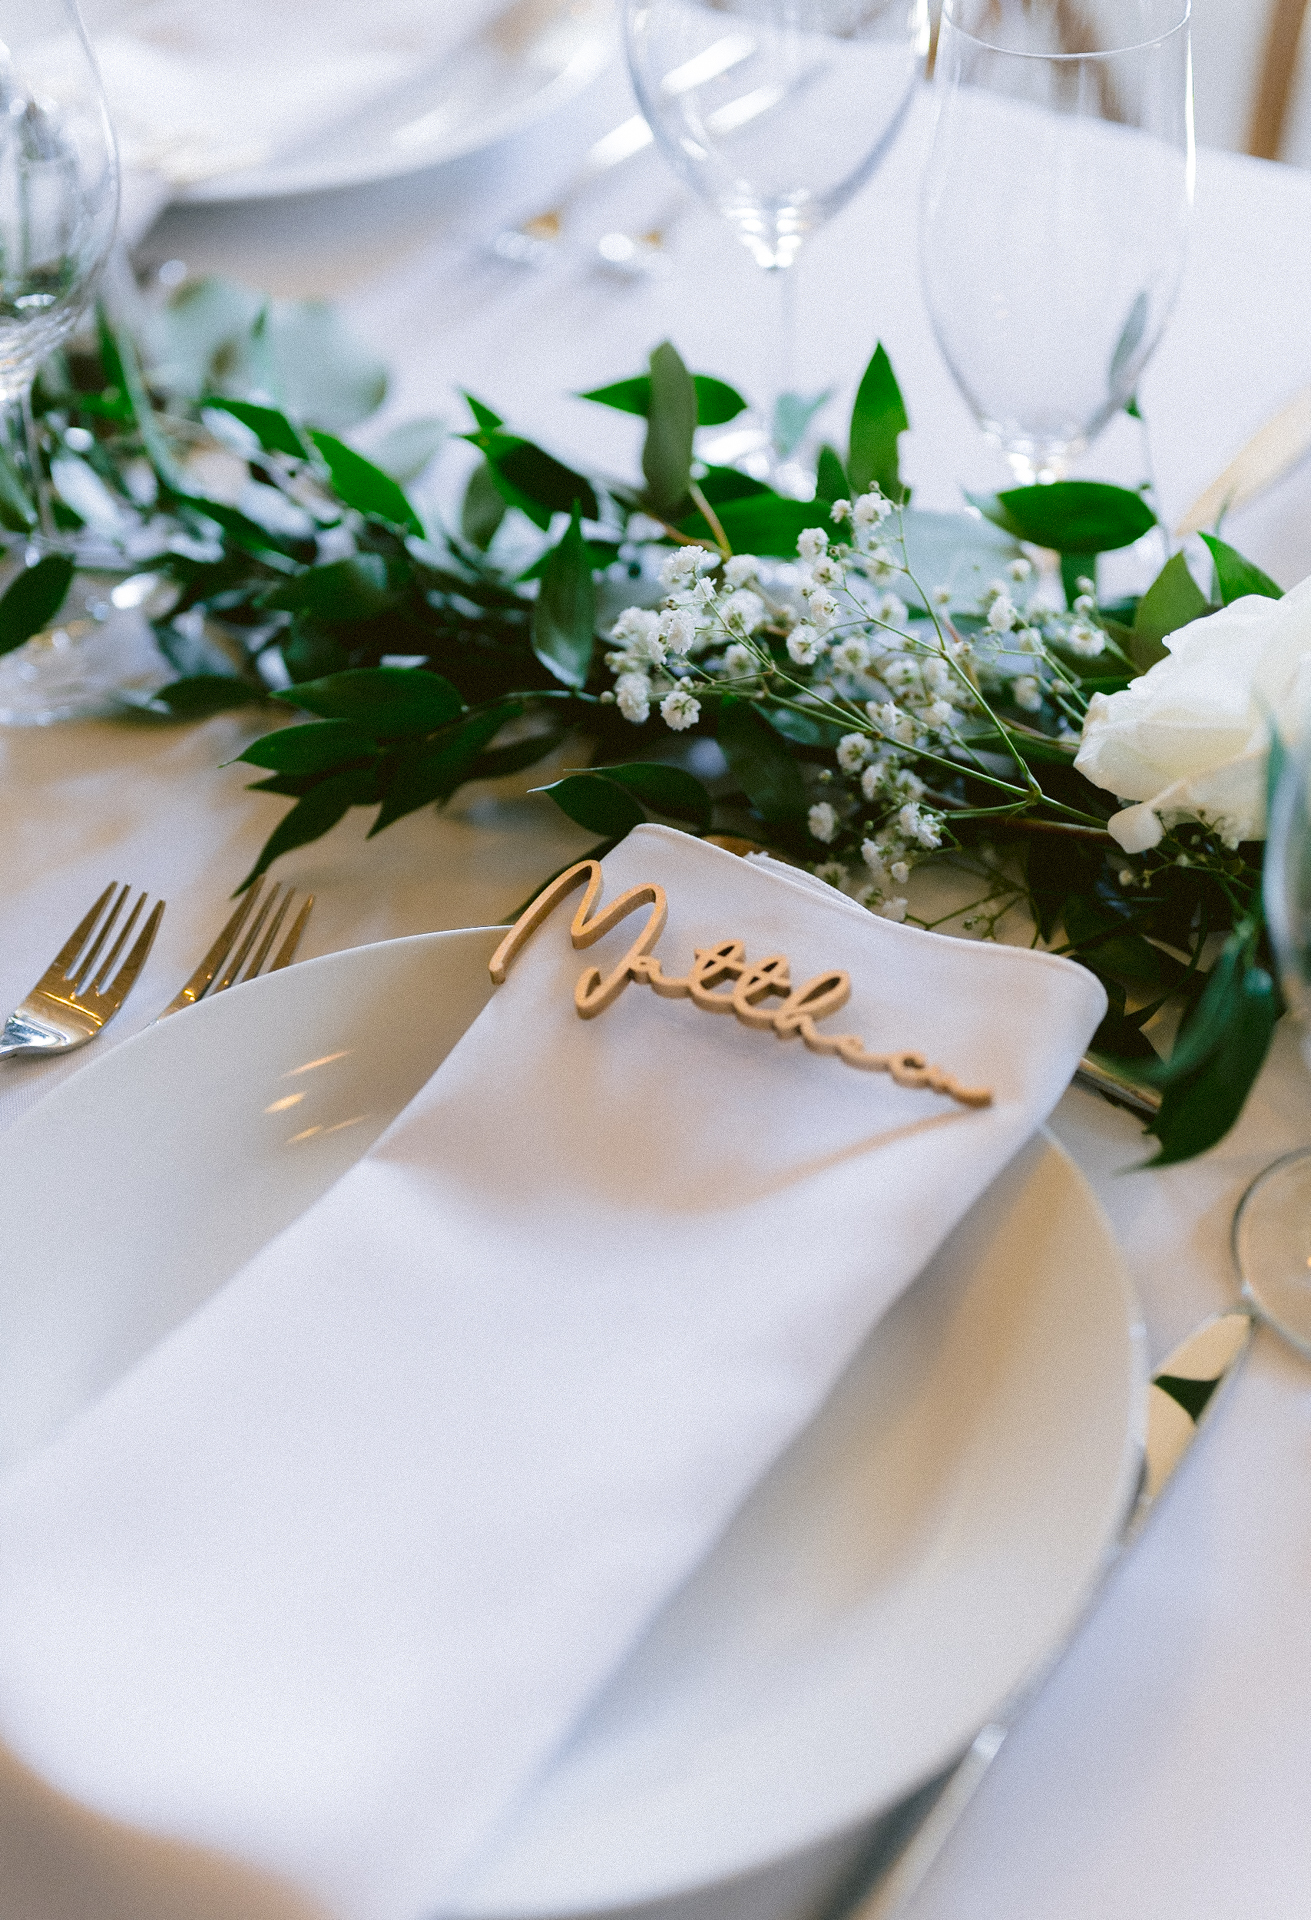 Elegant table setting with a name placeholder and floral decoration.